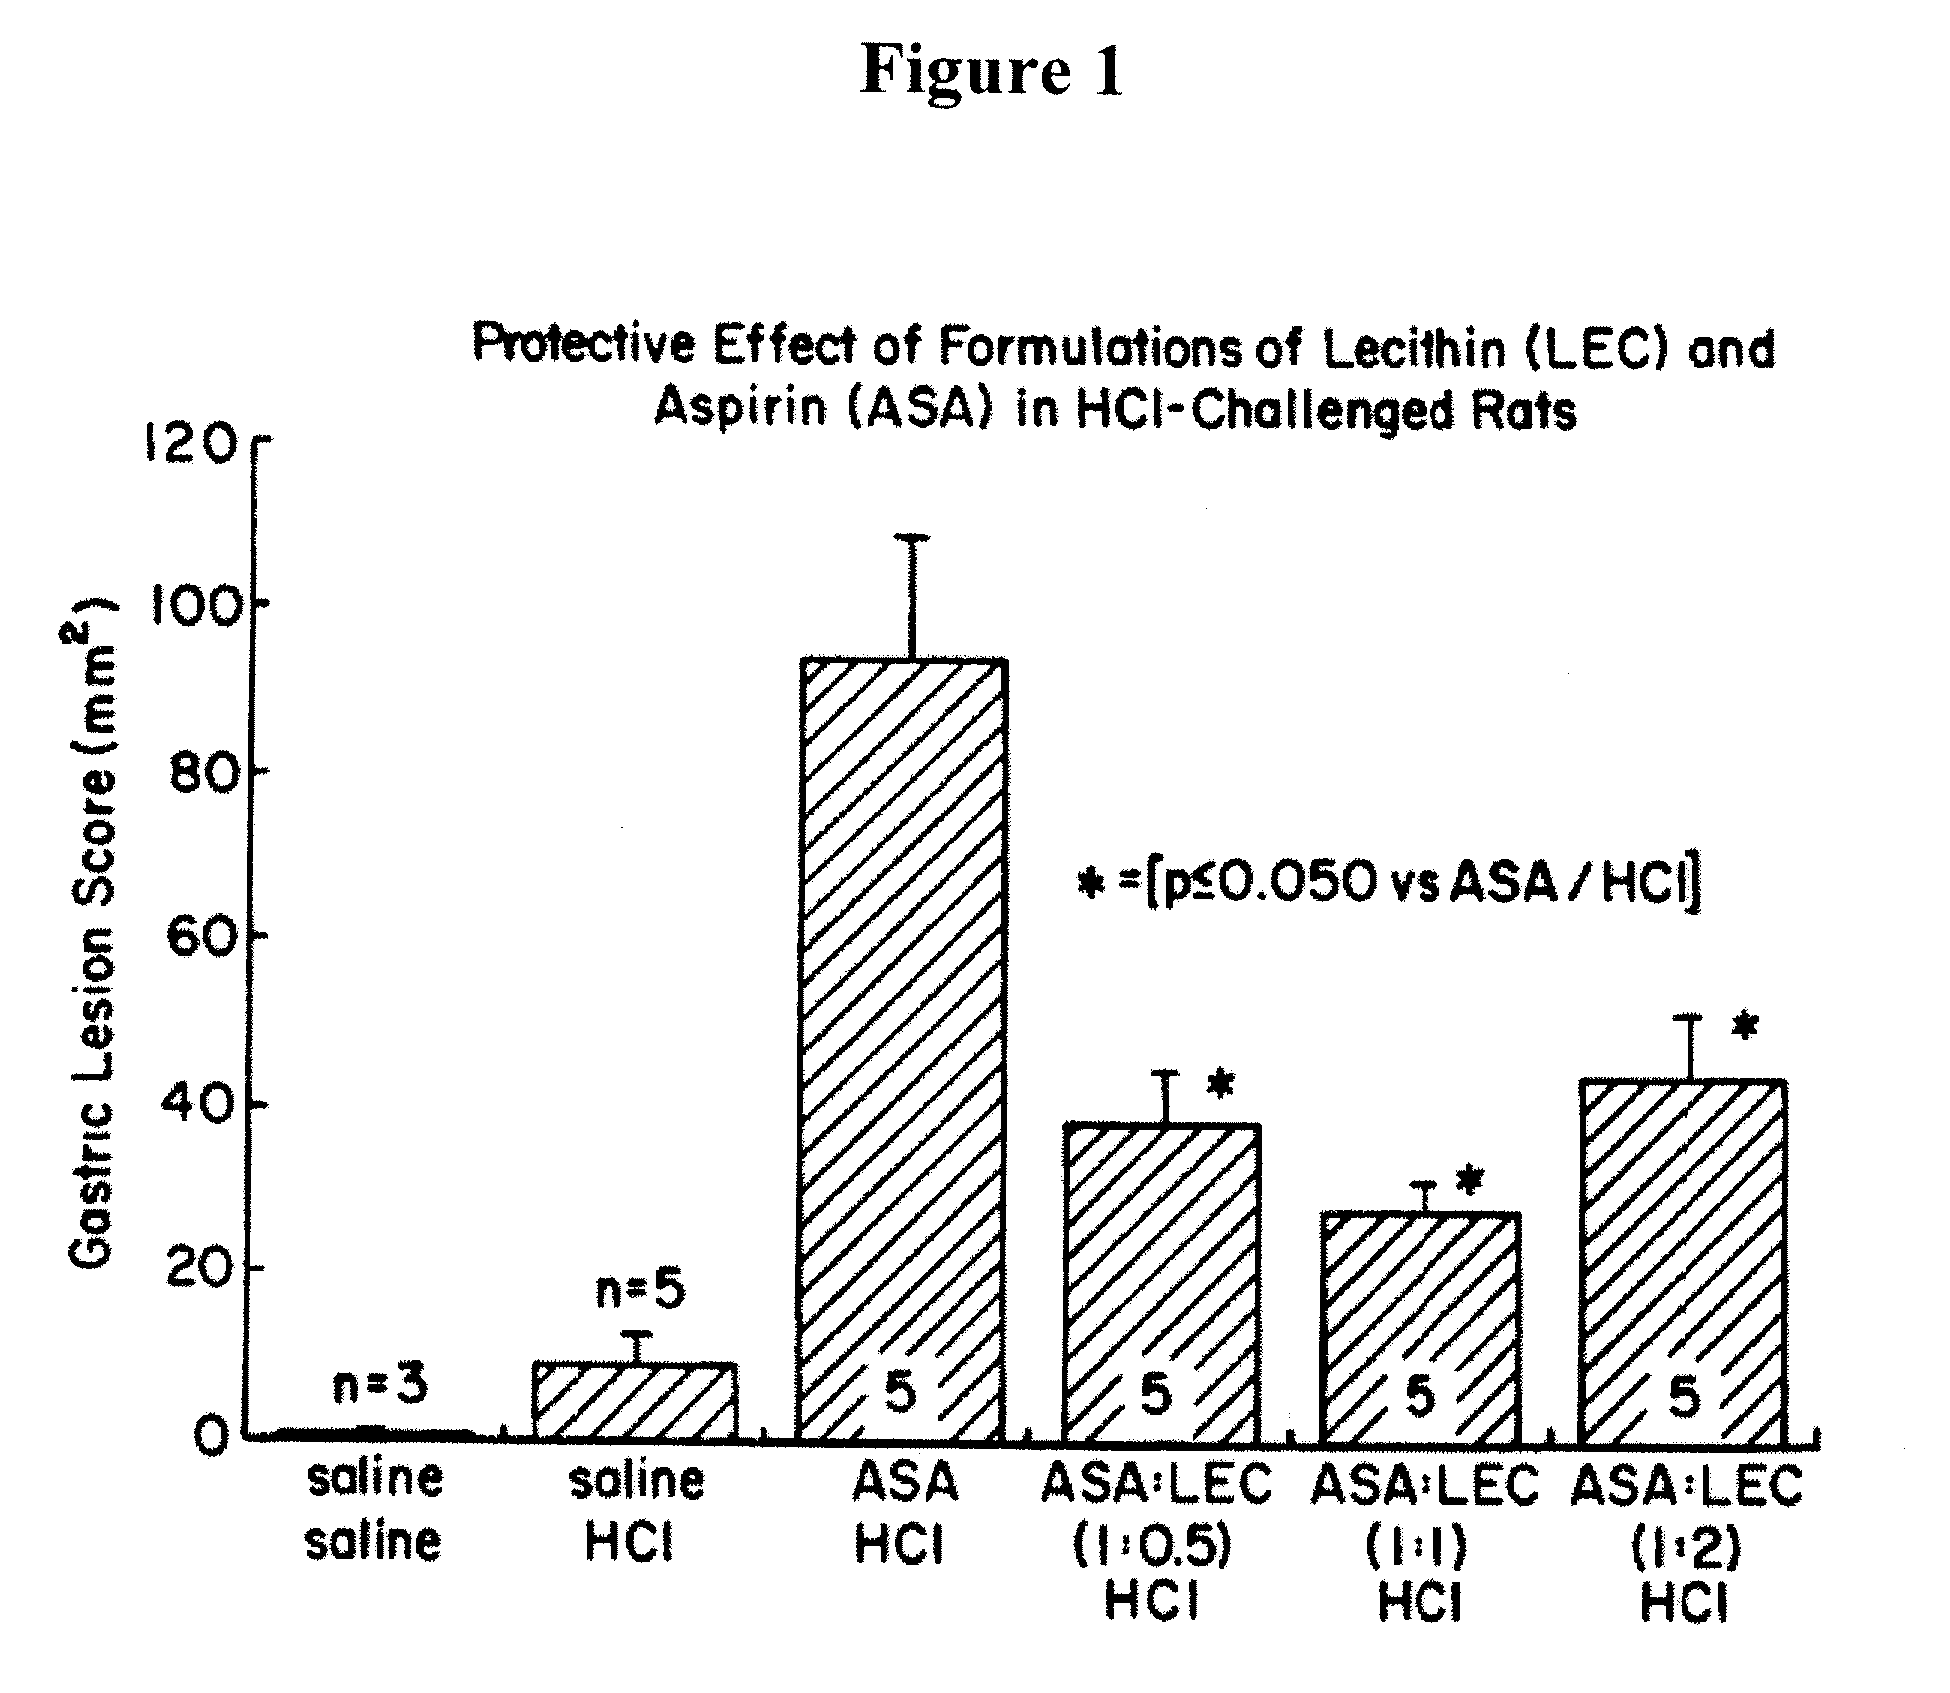 Oil-based nsaid compositions and methods for making and using same